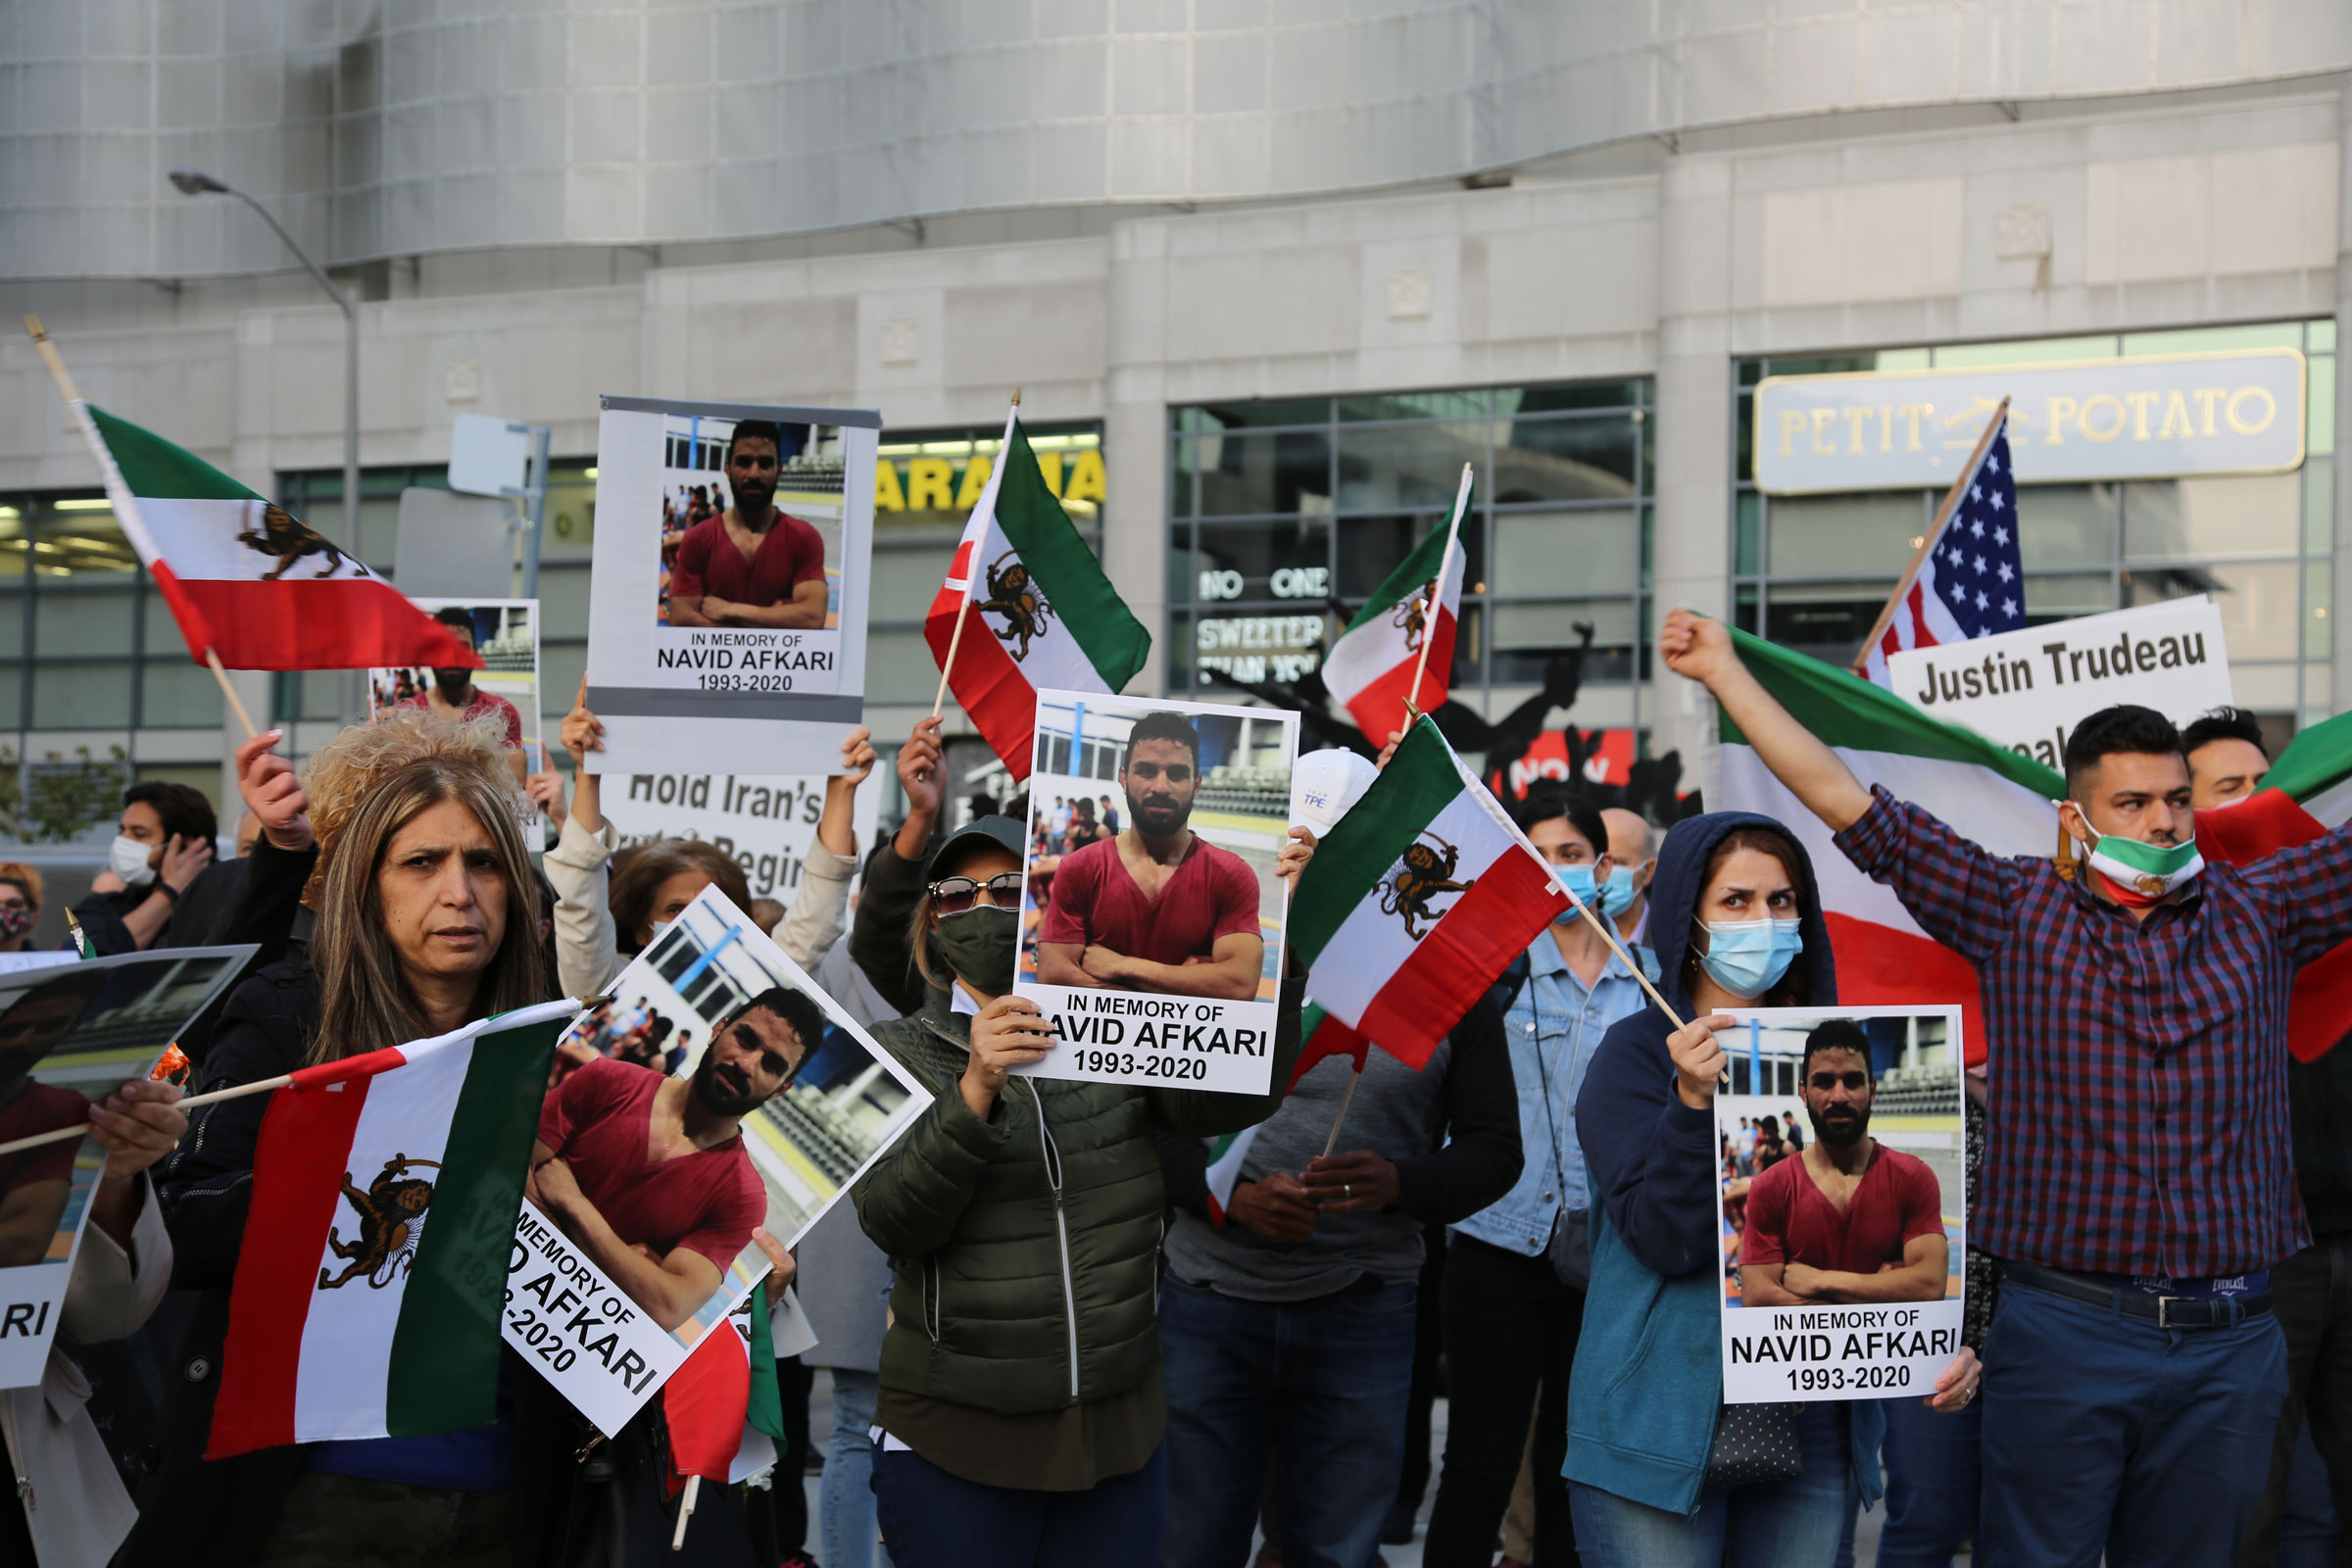 Iranians in Canada demonstrate against the execution of wrestler Navid Afkari by the Iranian regime, in Toronto, on Sept. 15, 2020.